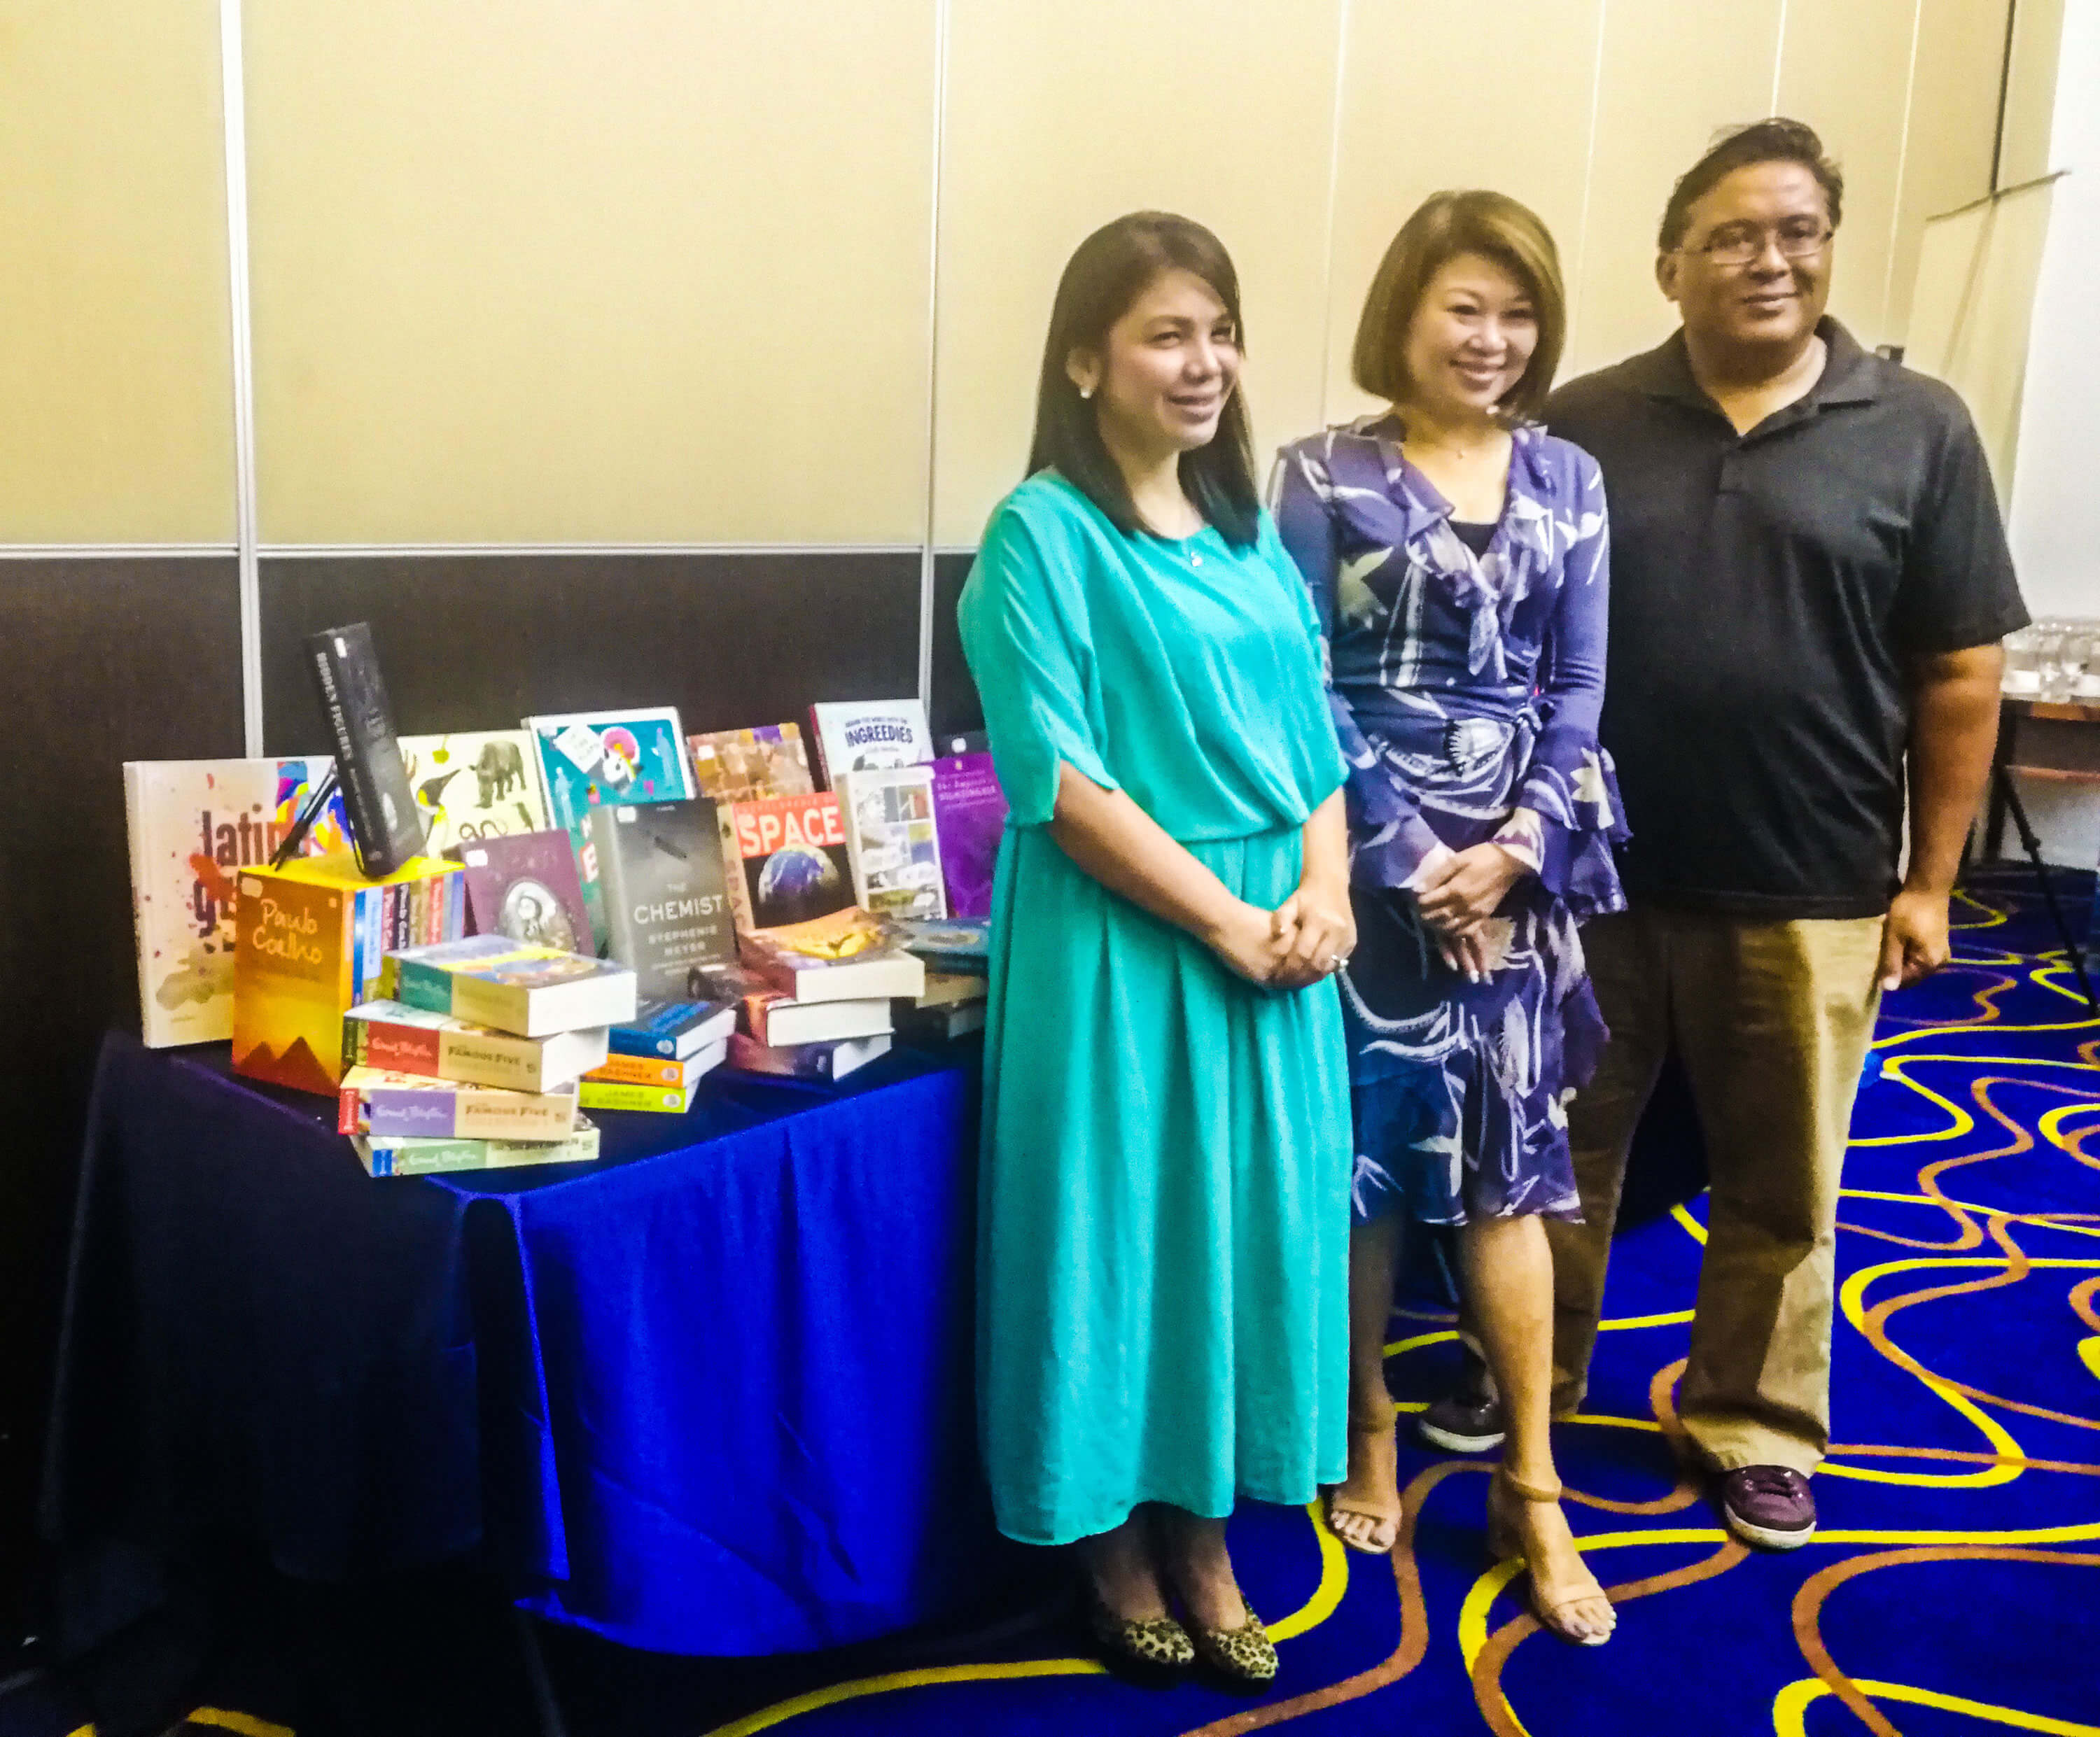 OVER A MILLION BOOKS. Big Bad Wolf Books Philippines Country Manager Narisa dela Peña, founder Jacqueline Ng, and Gawad Kalinga representative Toby Florendo.